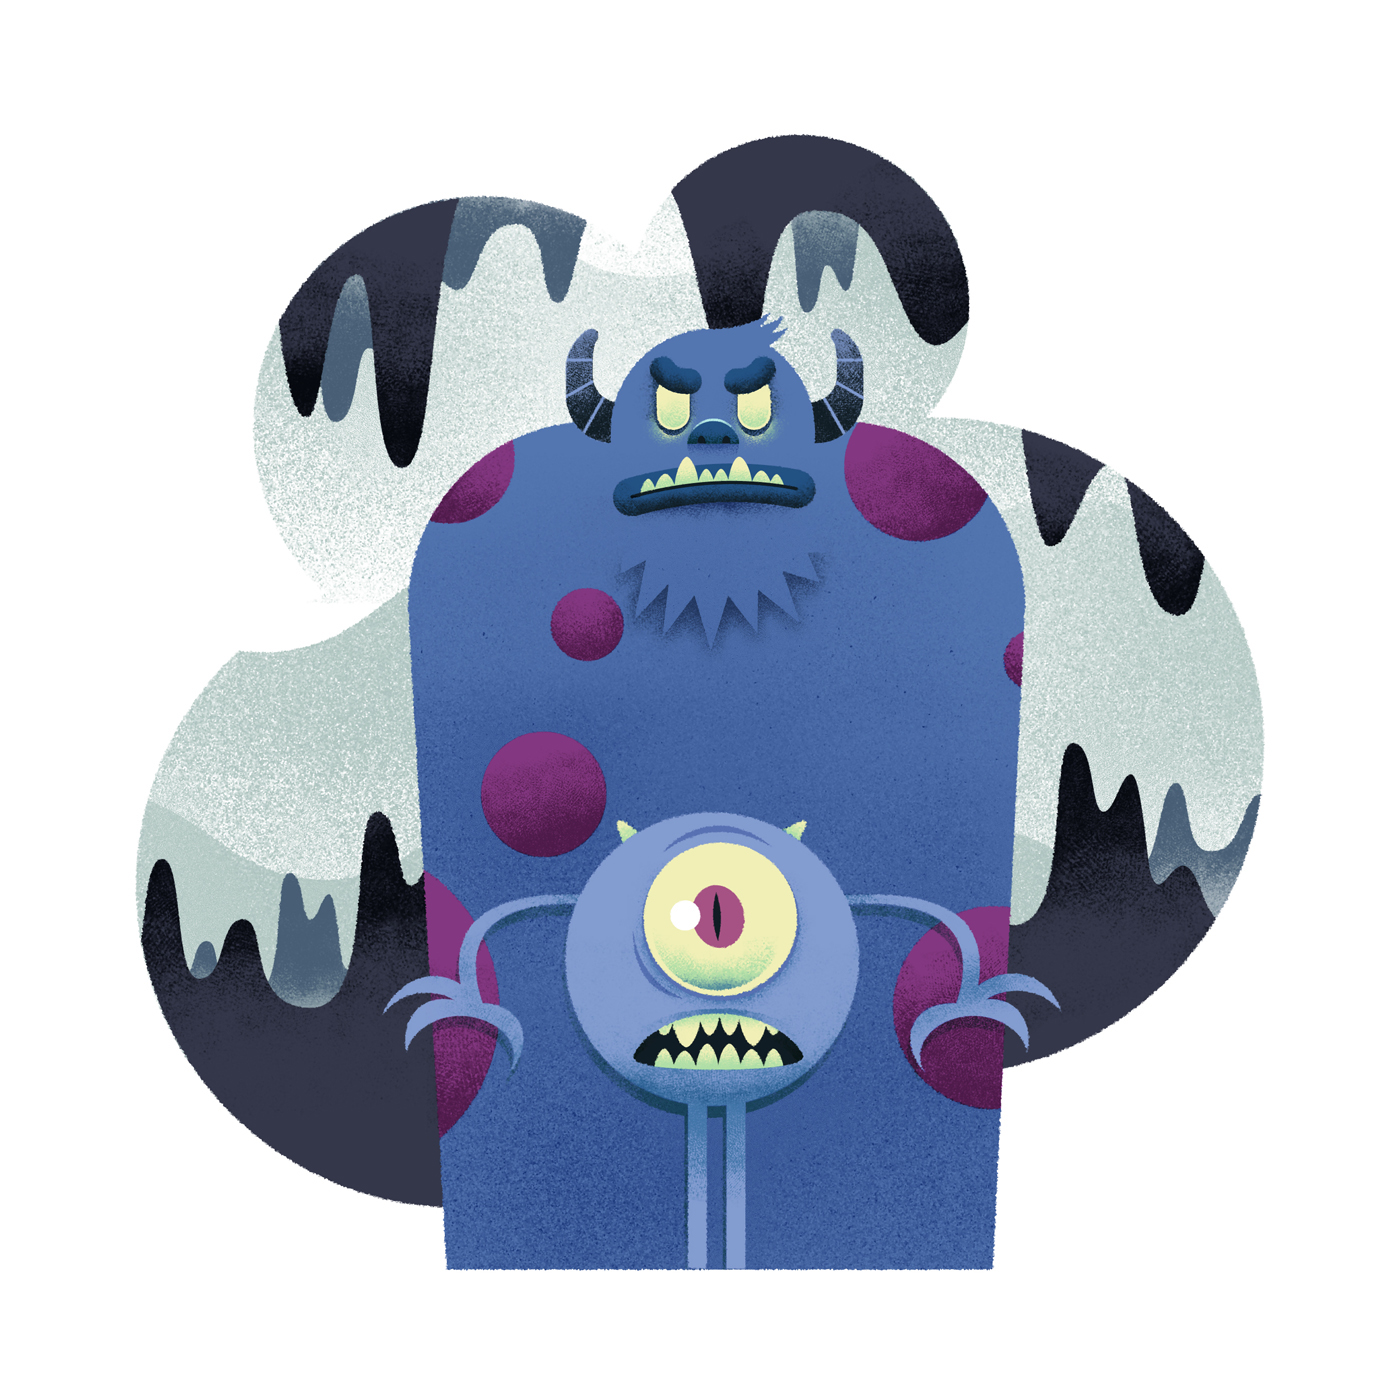 Monsters Inc fanart mike sully twisted cute Scary monster disney pixar texture